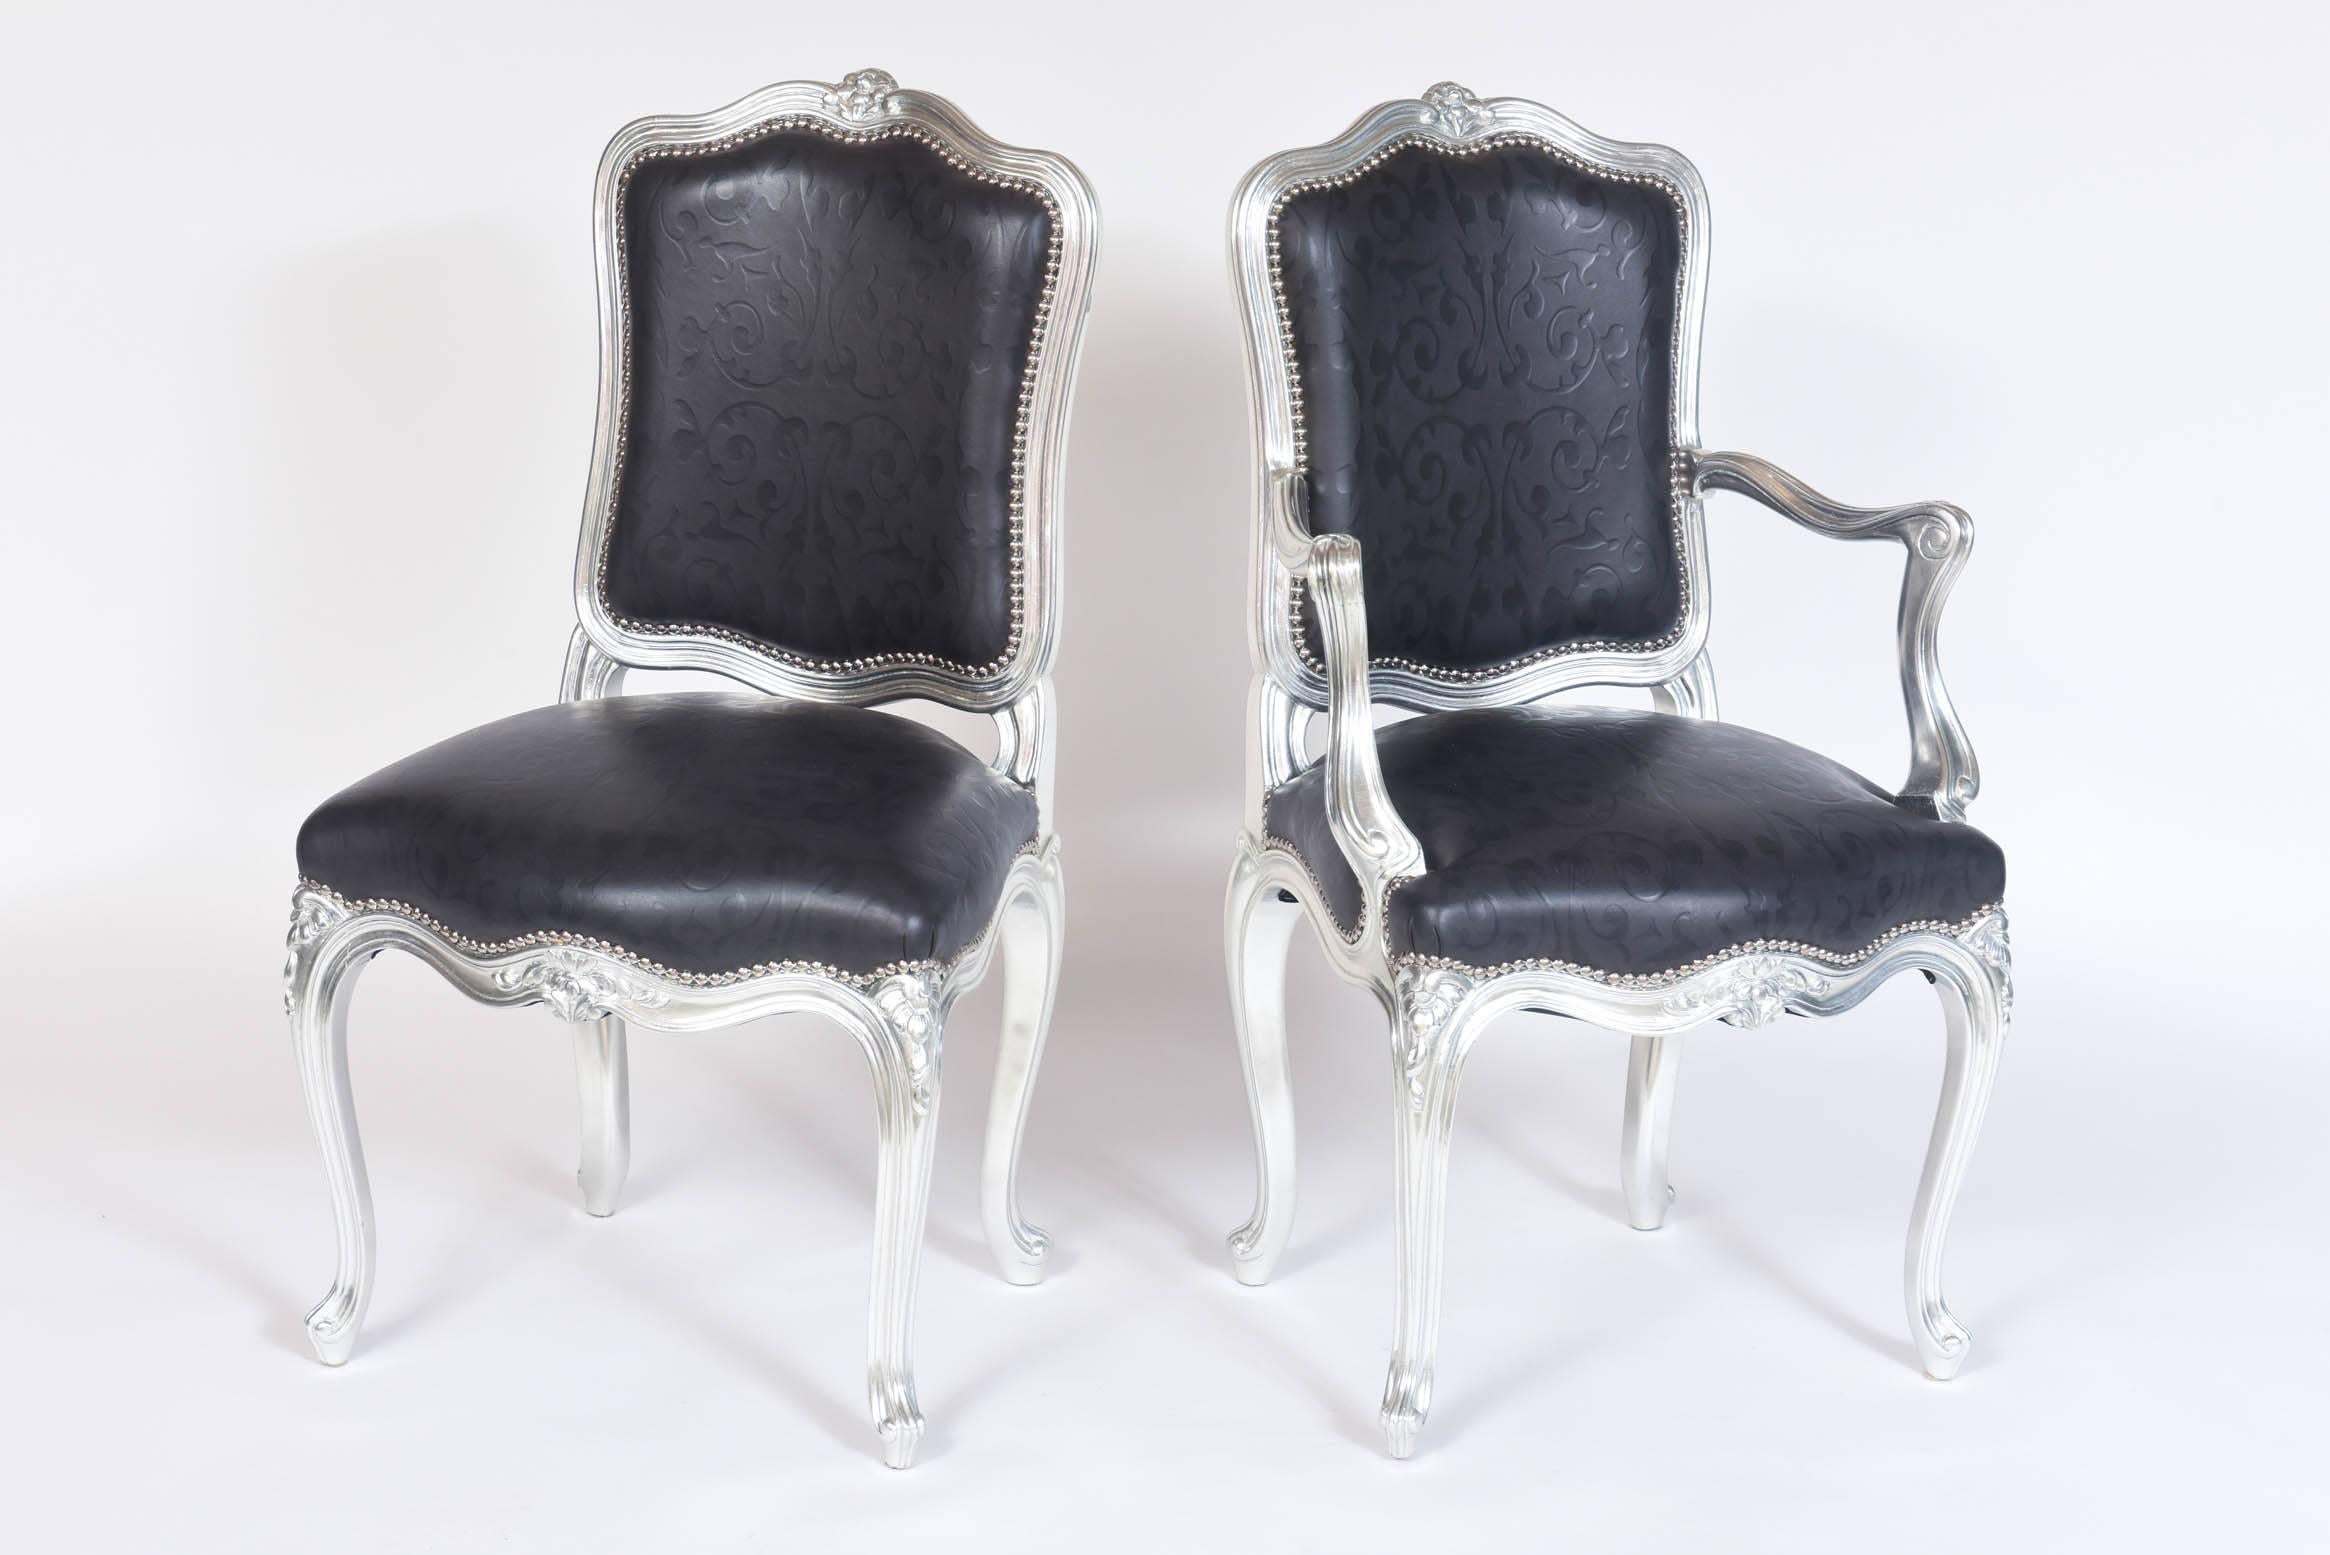 An impressive set of 12 dining chairs by the design architect Carlo Rampazzi, circa 1980.
Born in Ancona Italy in 1949, he graduated in interior decoration from Lugano and Paris.
His expertise is appreciated and recognized throughout Europe,